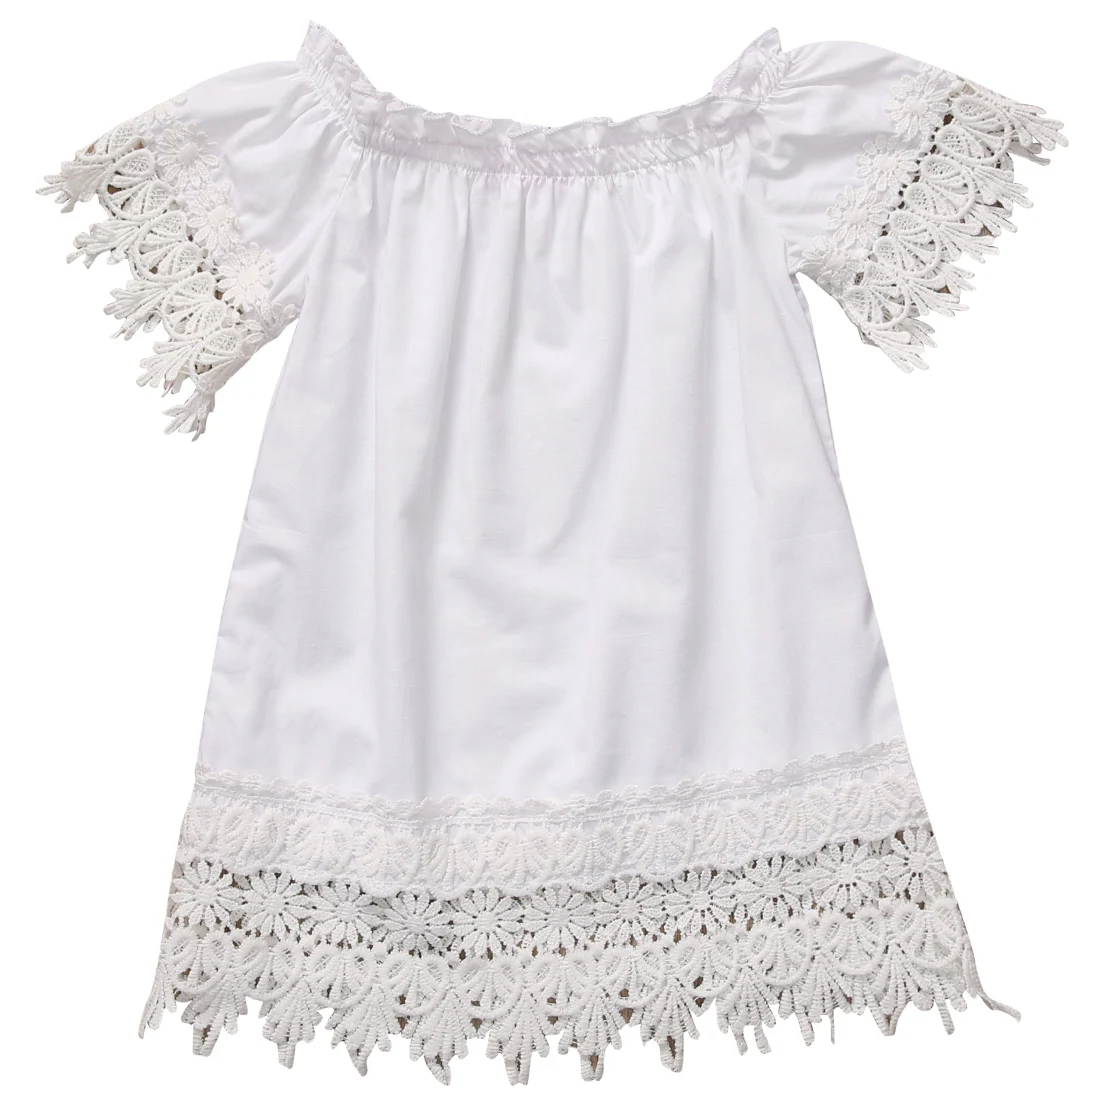 Kids Baby Girls Clothes Dresses Princess Party Lace Top Casual Sundress White Brief Costume Dress Girl New Summer